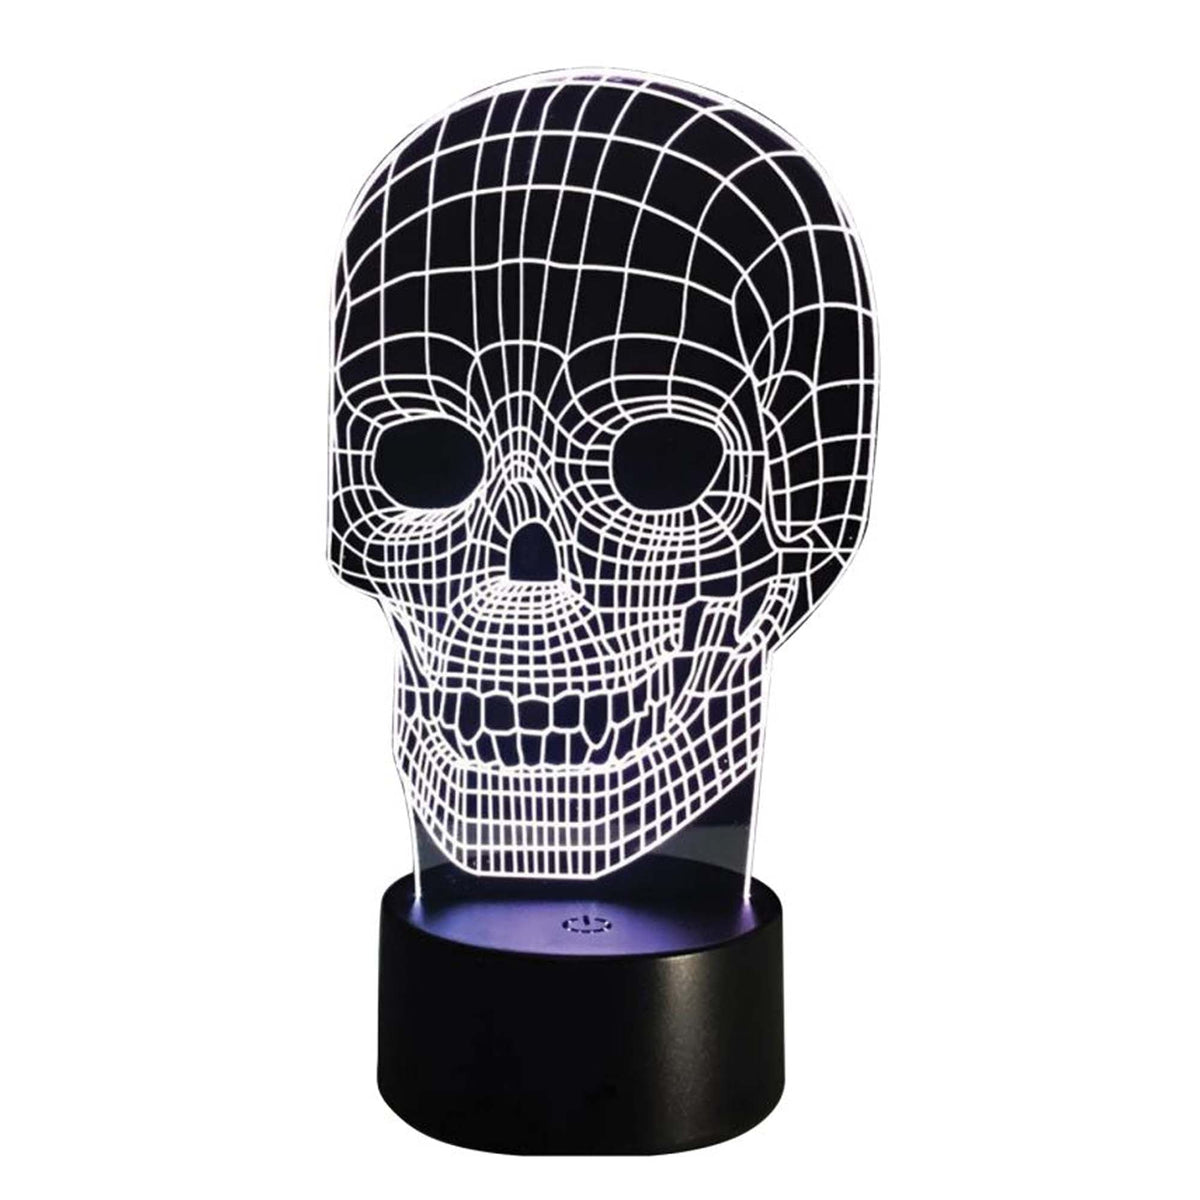 VISUAL EFFECTS Halloween 3D LED Light Up Skull, 1 Count